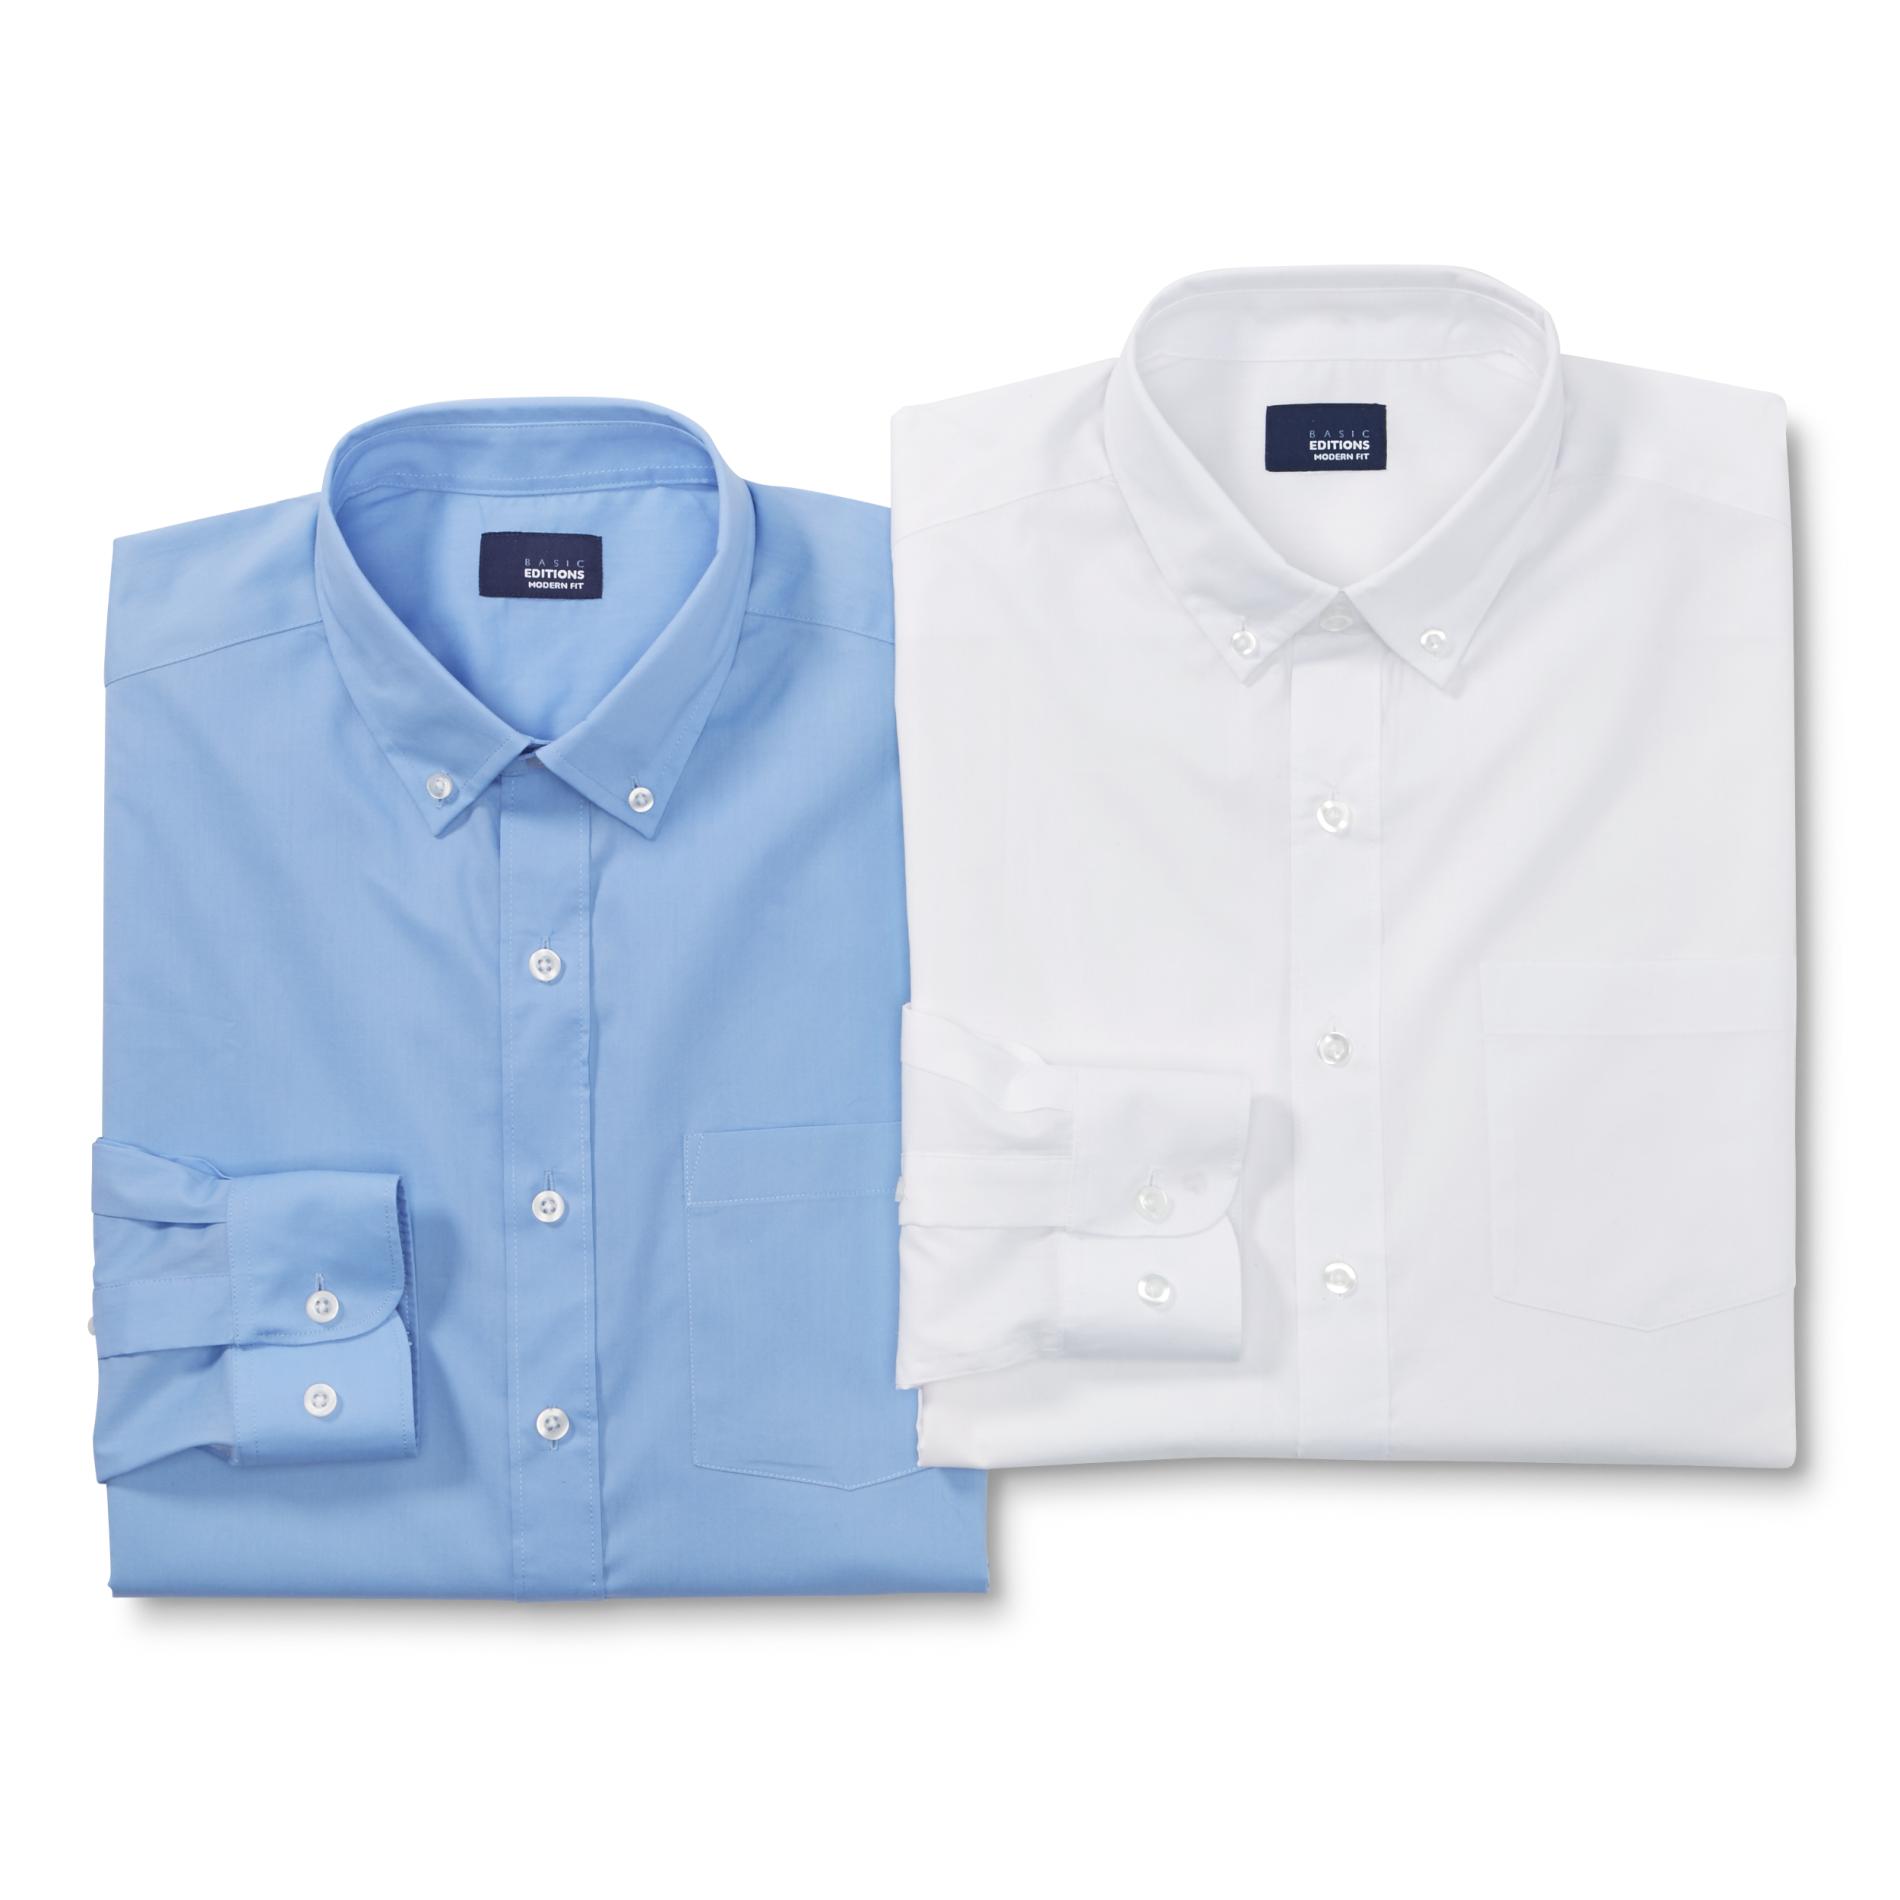 Basic Editions Men's 2-Pack Easy Care Dress Shirts